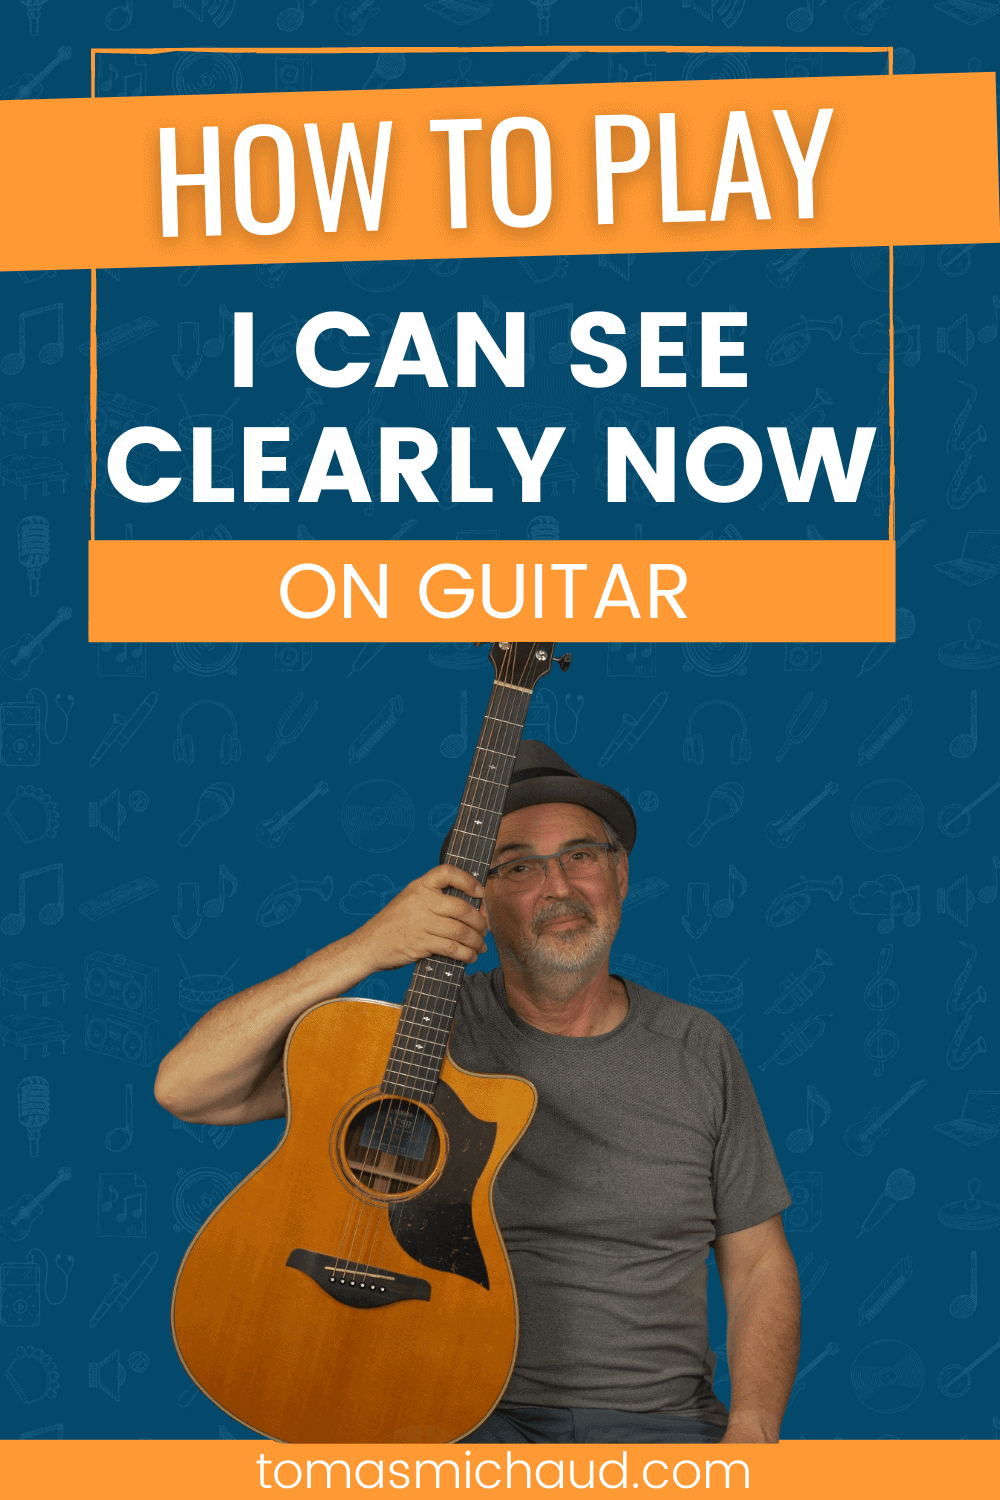 How to Play I Can See Clearly Now On Guitar